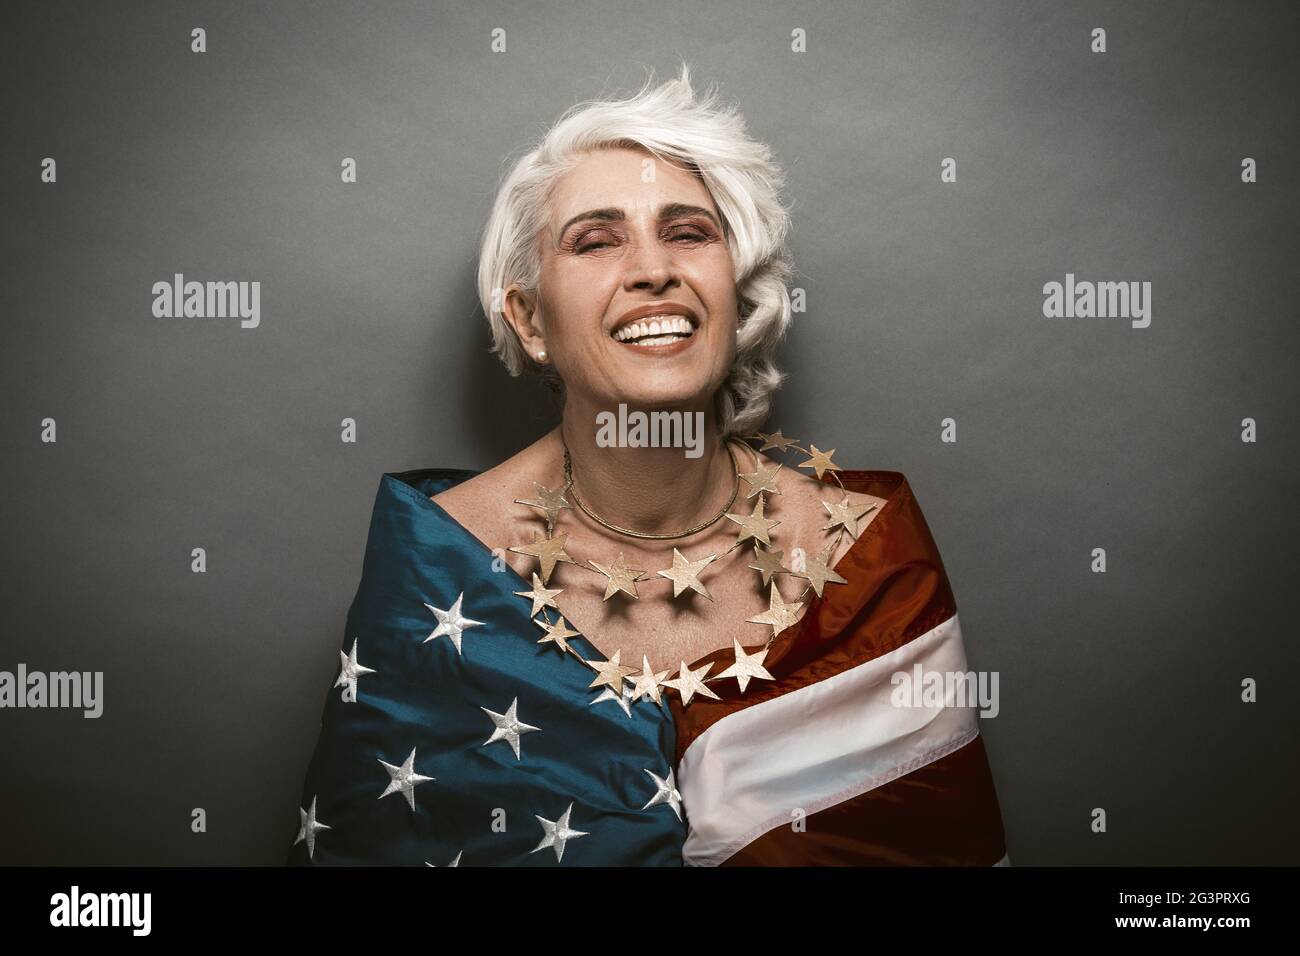 Toothy smiling senior woman covered with American flag Stock Photo